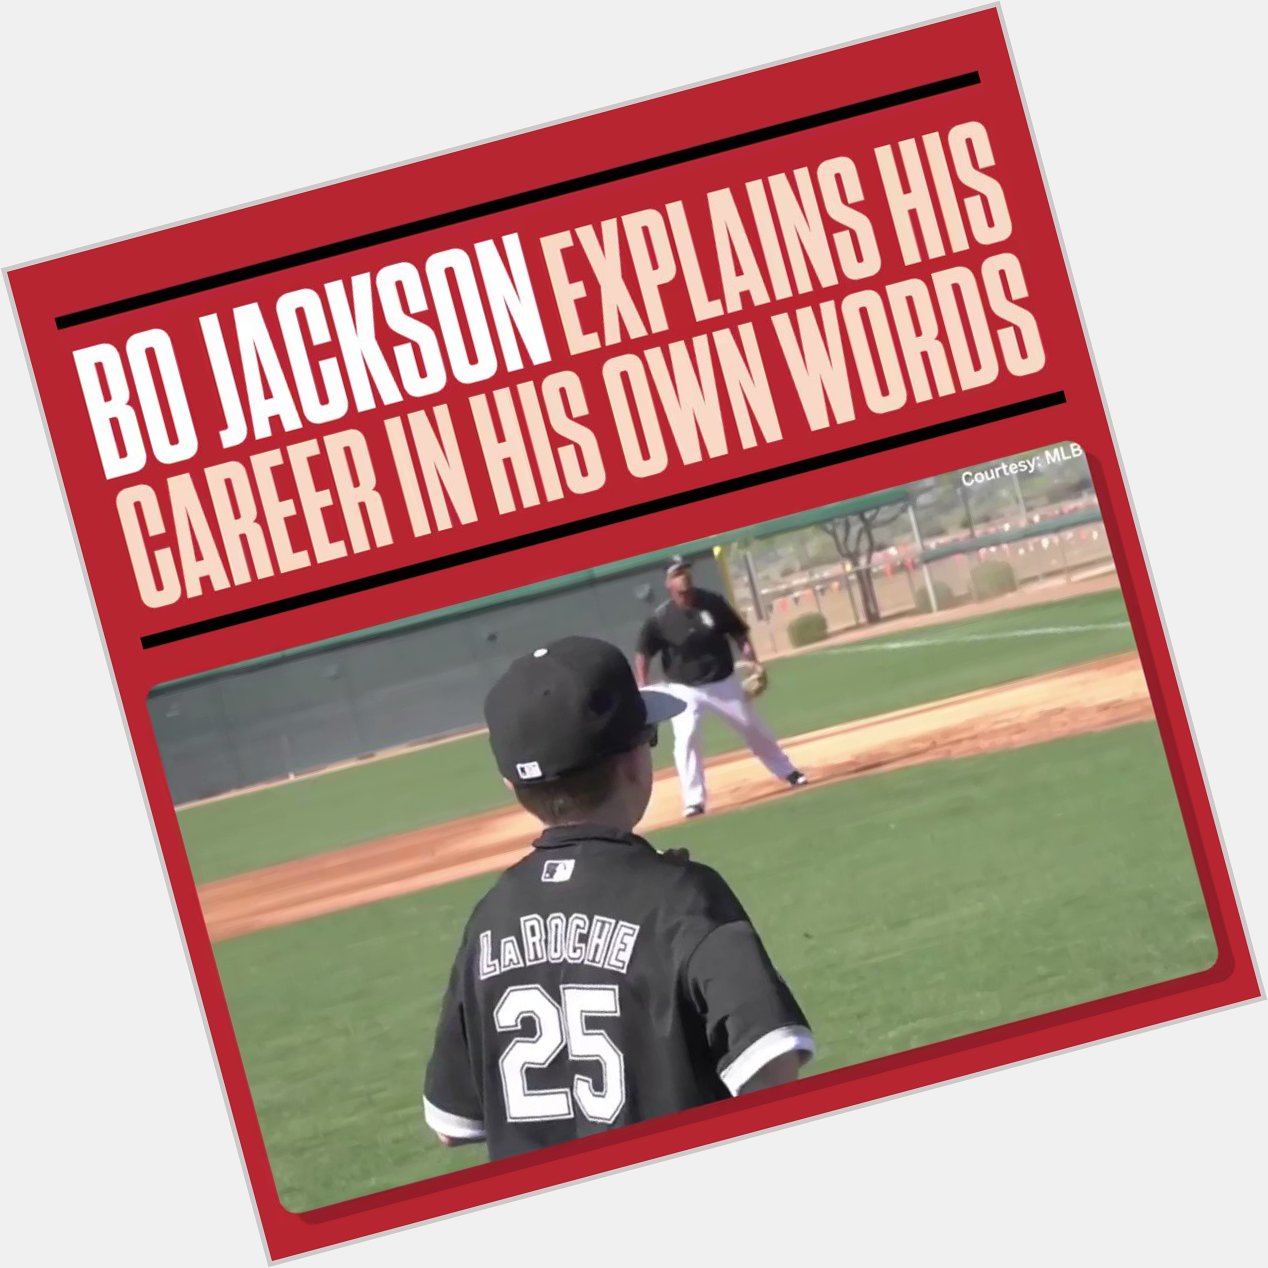 Happy birthday, Bo Jackson! Listen to the man explain his career in his own words 